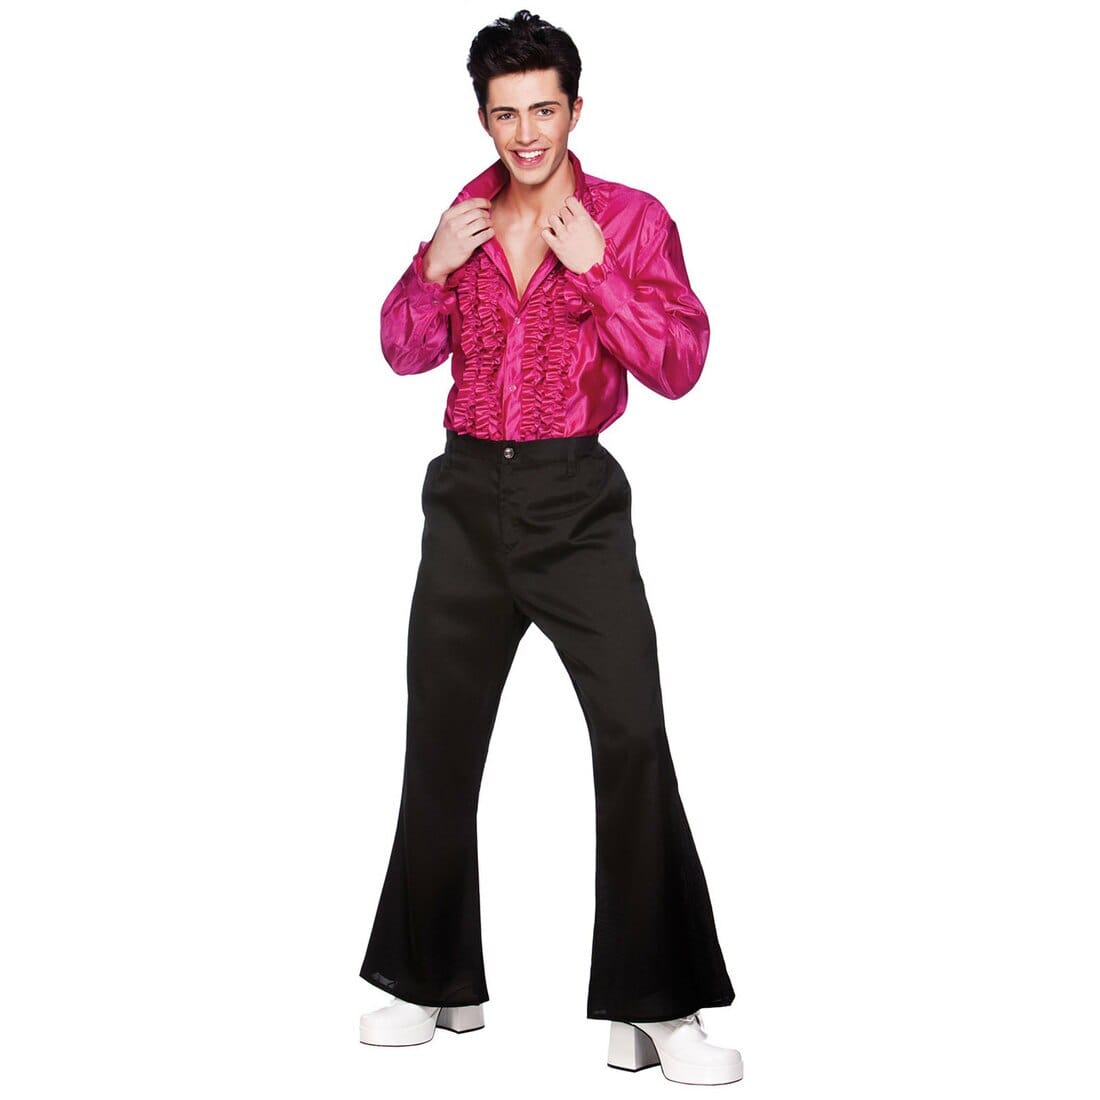 Mens Hot Pink Disco Fever 70s Frilly Shirt Halloween Costume – XS-Stock ...